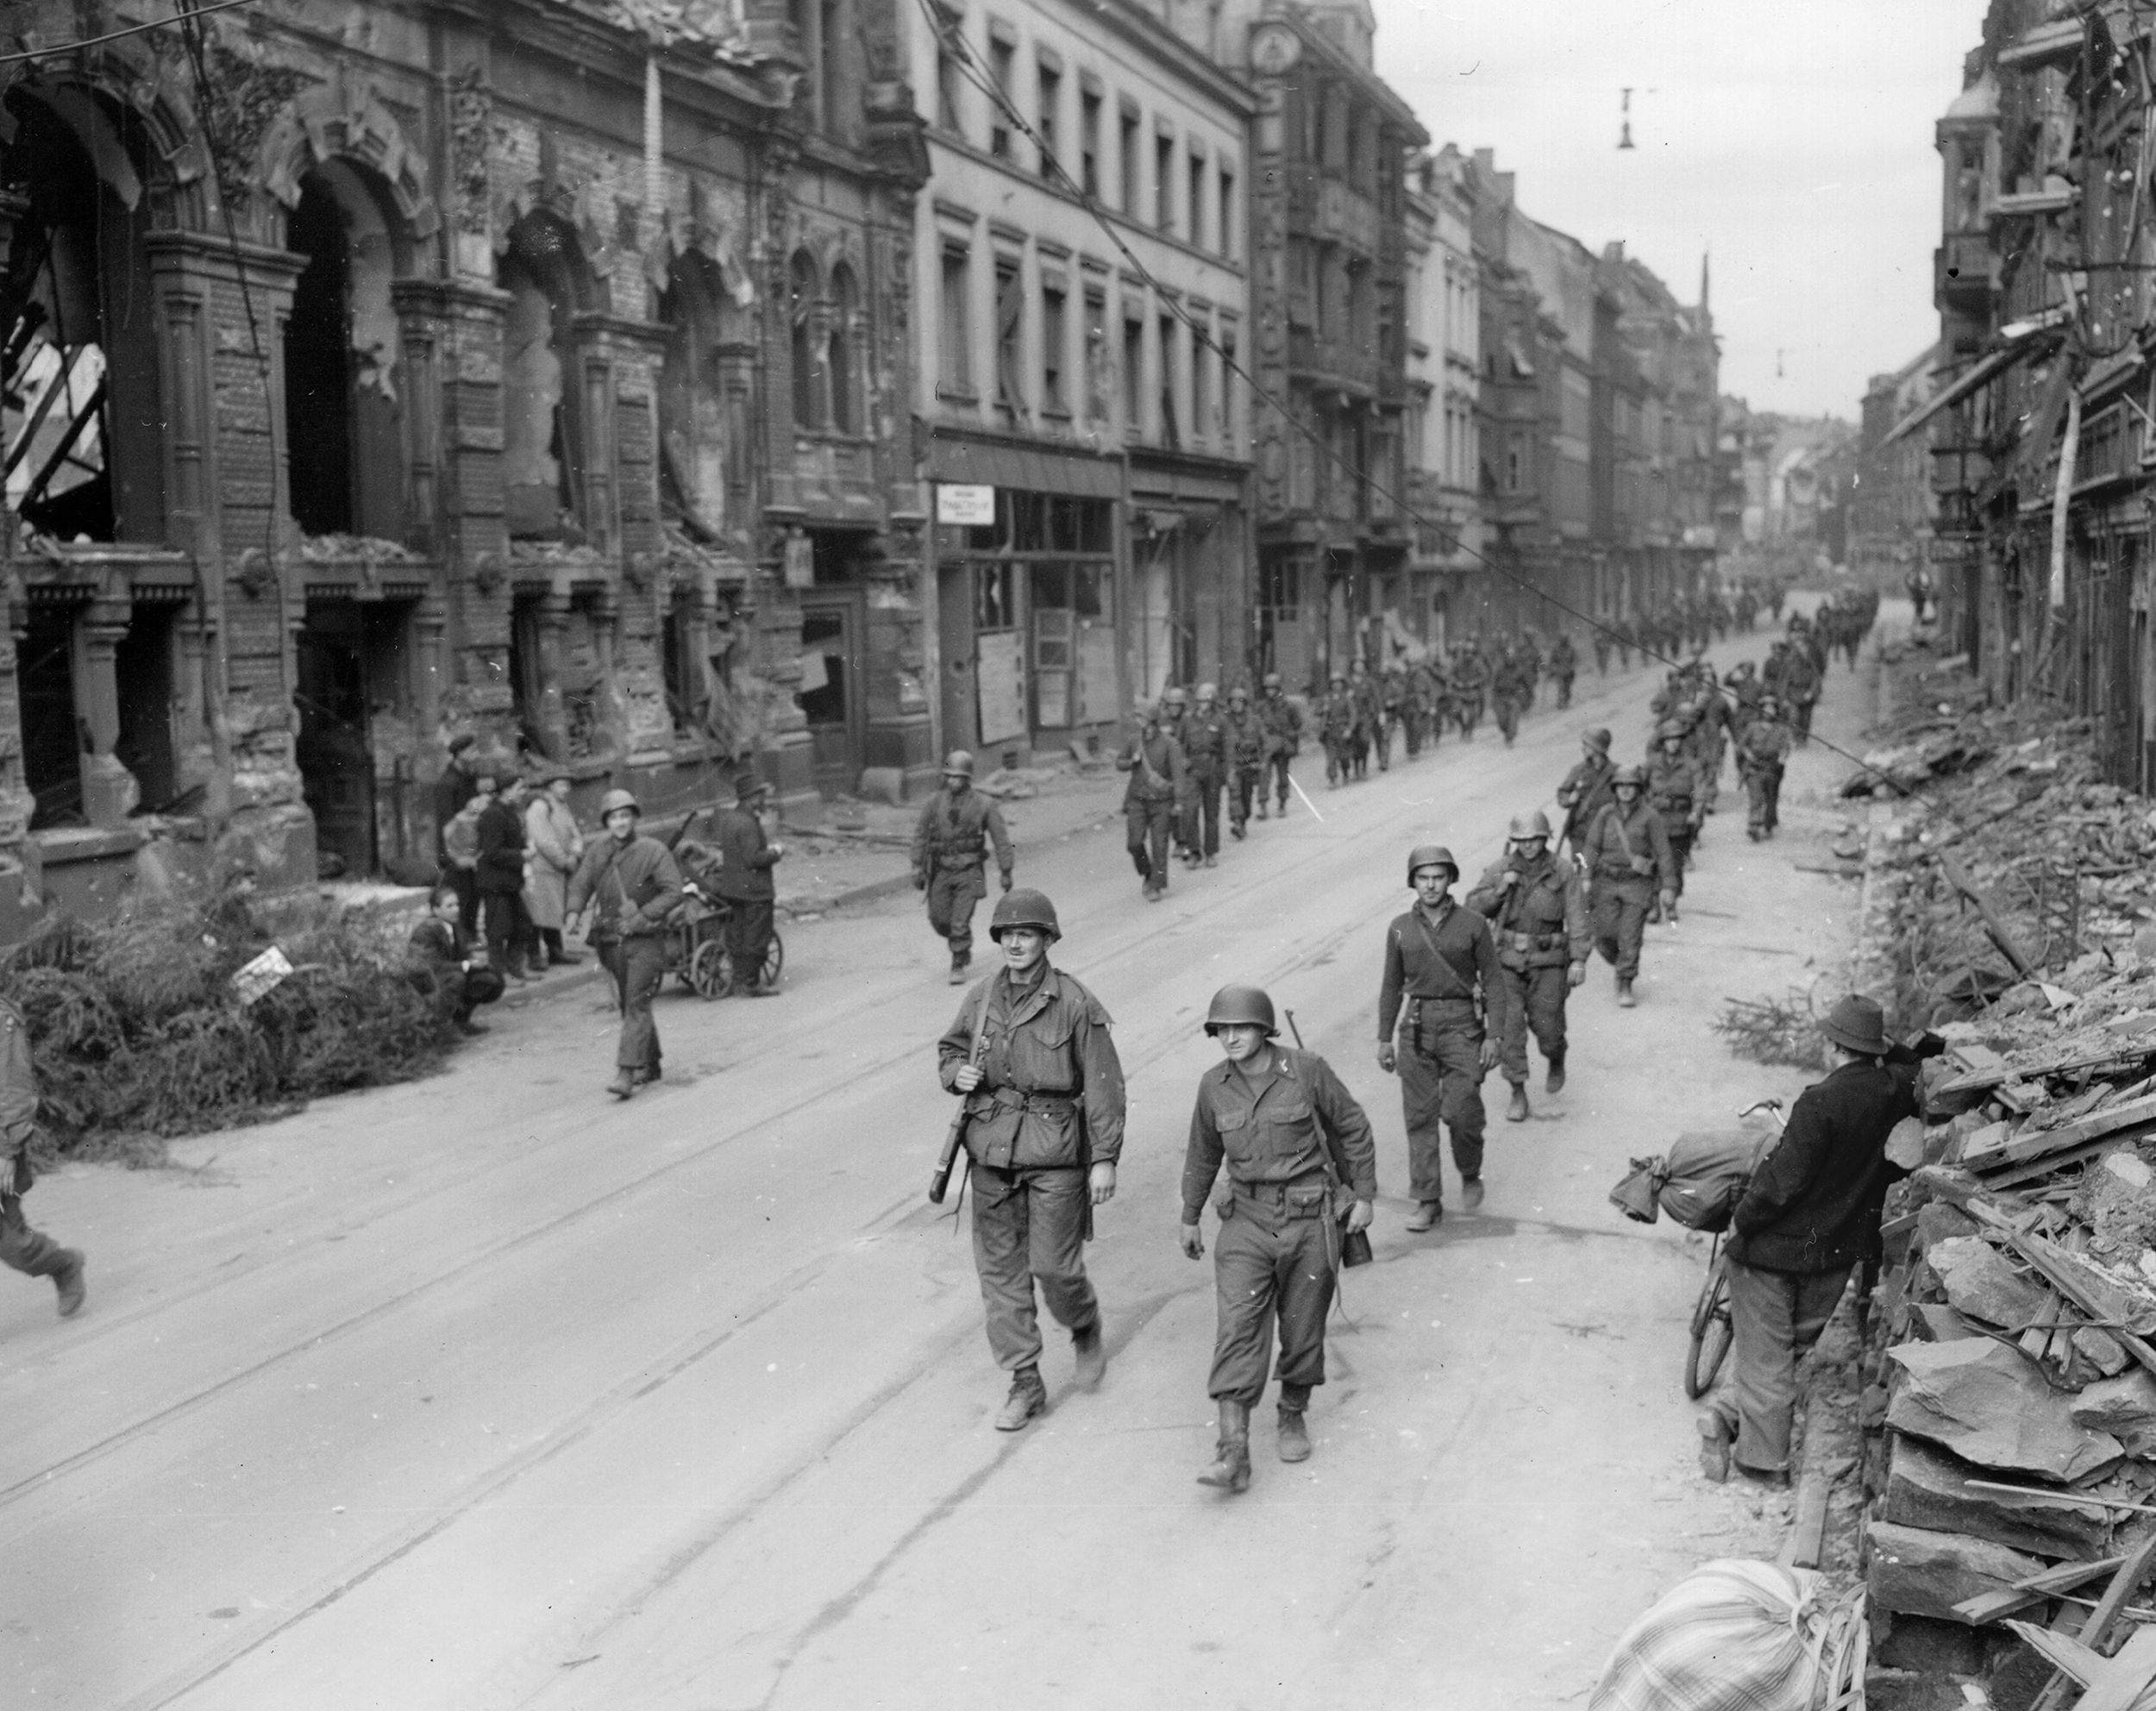 Men of the 2nd Battalion, 275th Infantry, 70th Division, move through Saarbrücken while being watched by citizens, March 20, 1945.